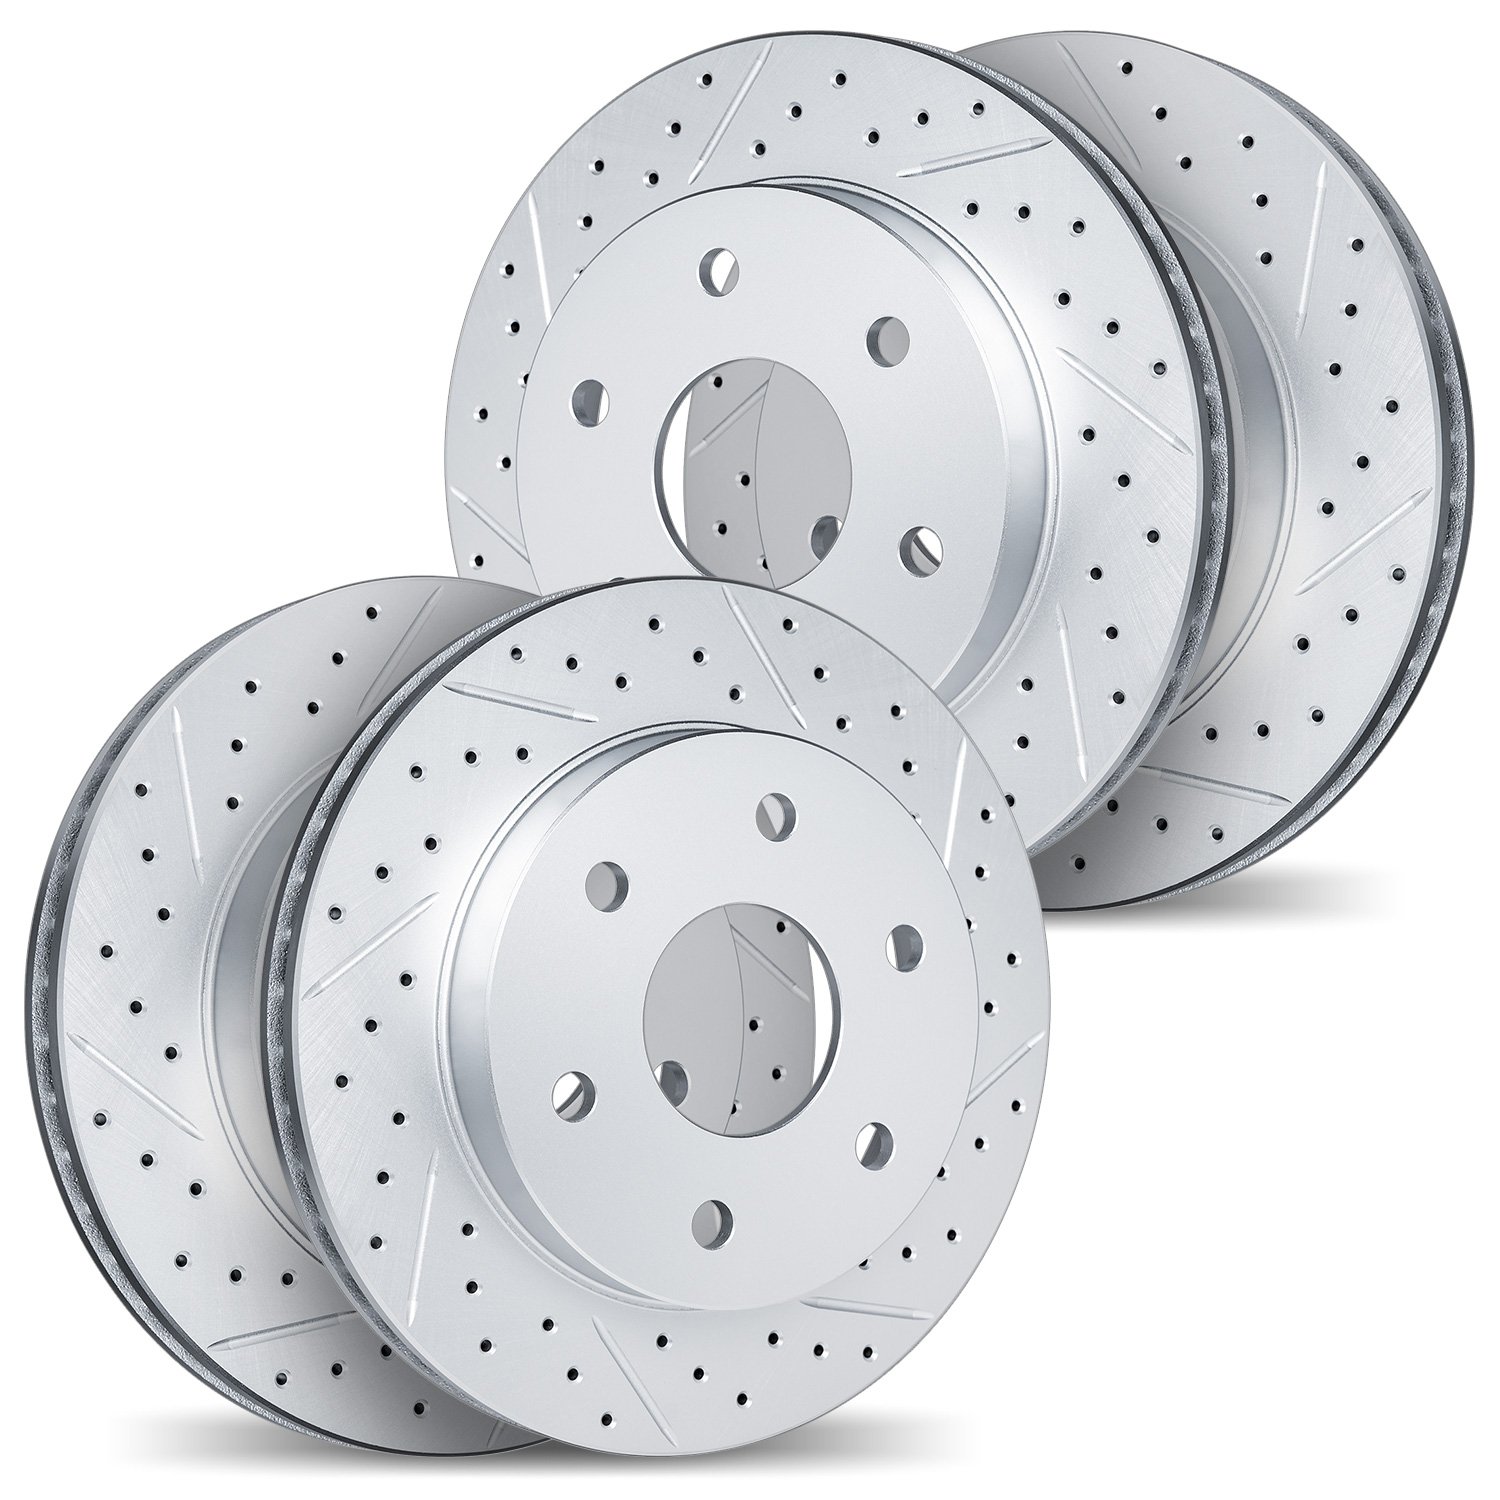 2004-54189 Geoperformance Drilled/Slotted Brake Rotors, Fits Select Ford/Lincoln/Mercury/Mazda, Position: Front and Rear